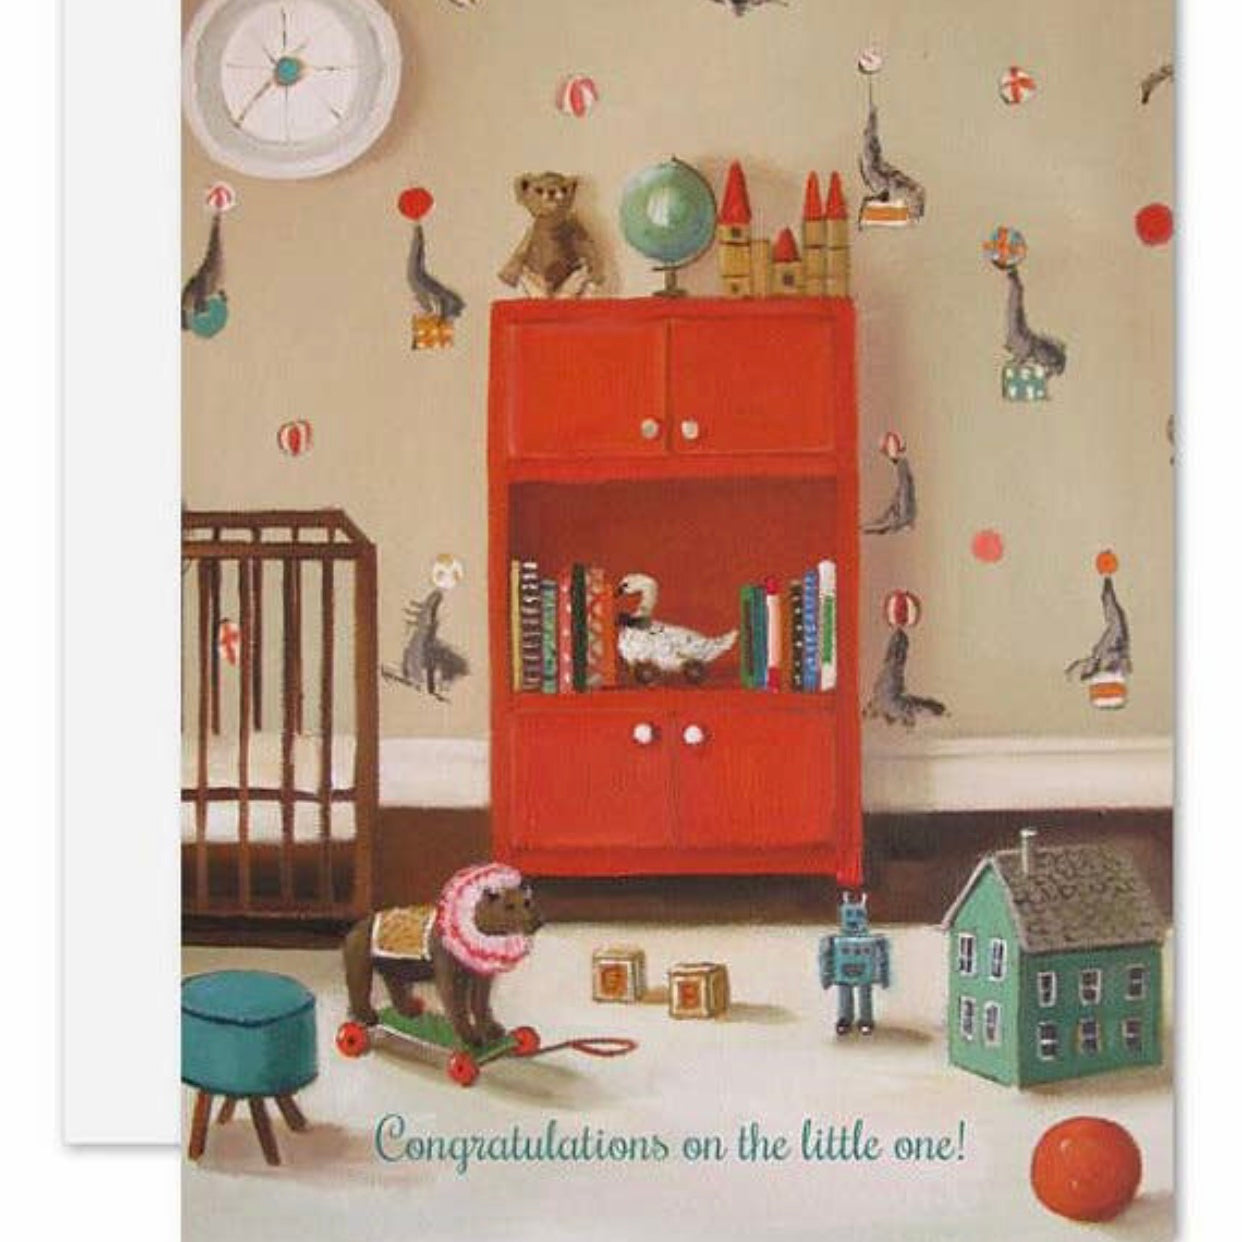 Congratulations on the little one greeting card